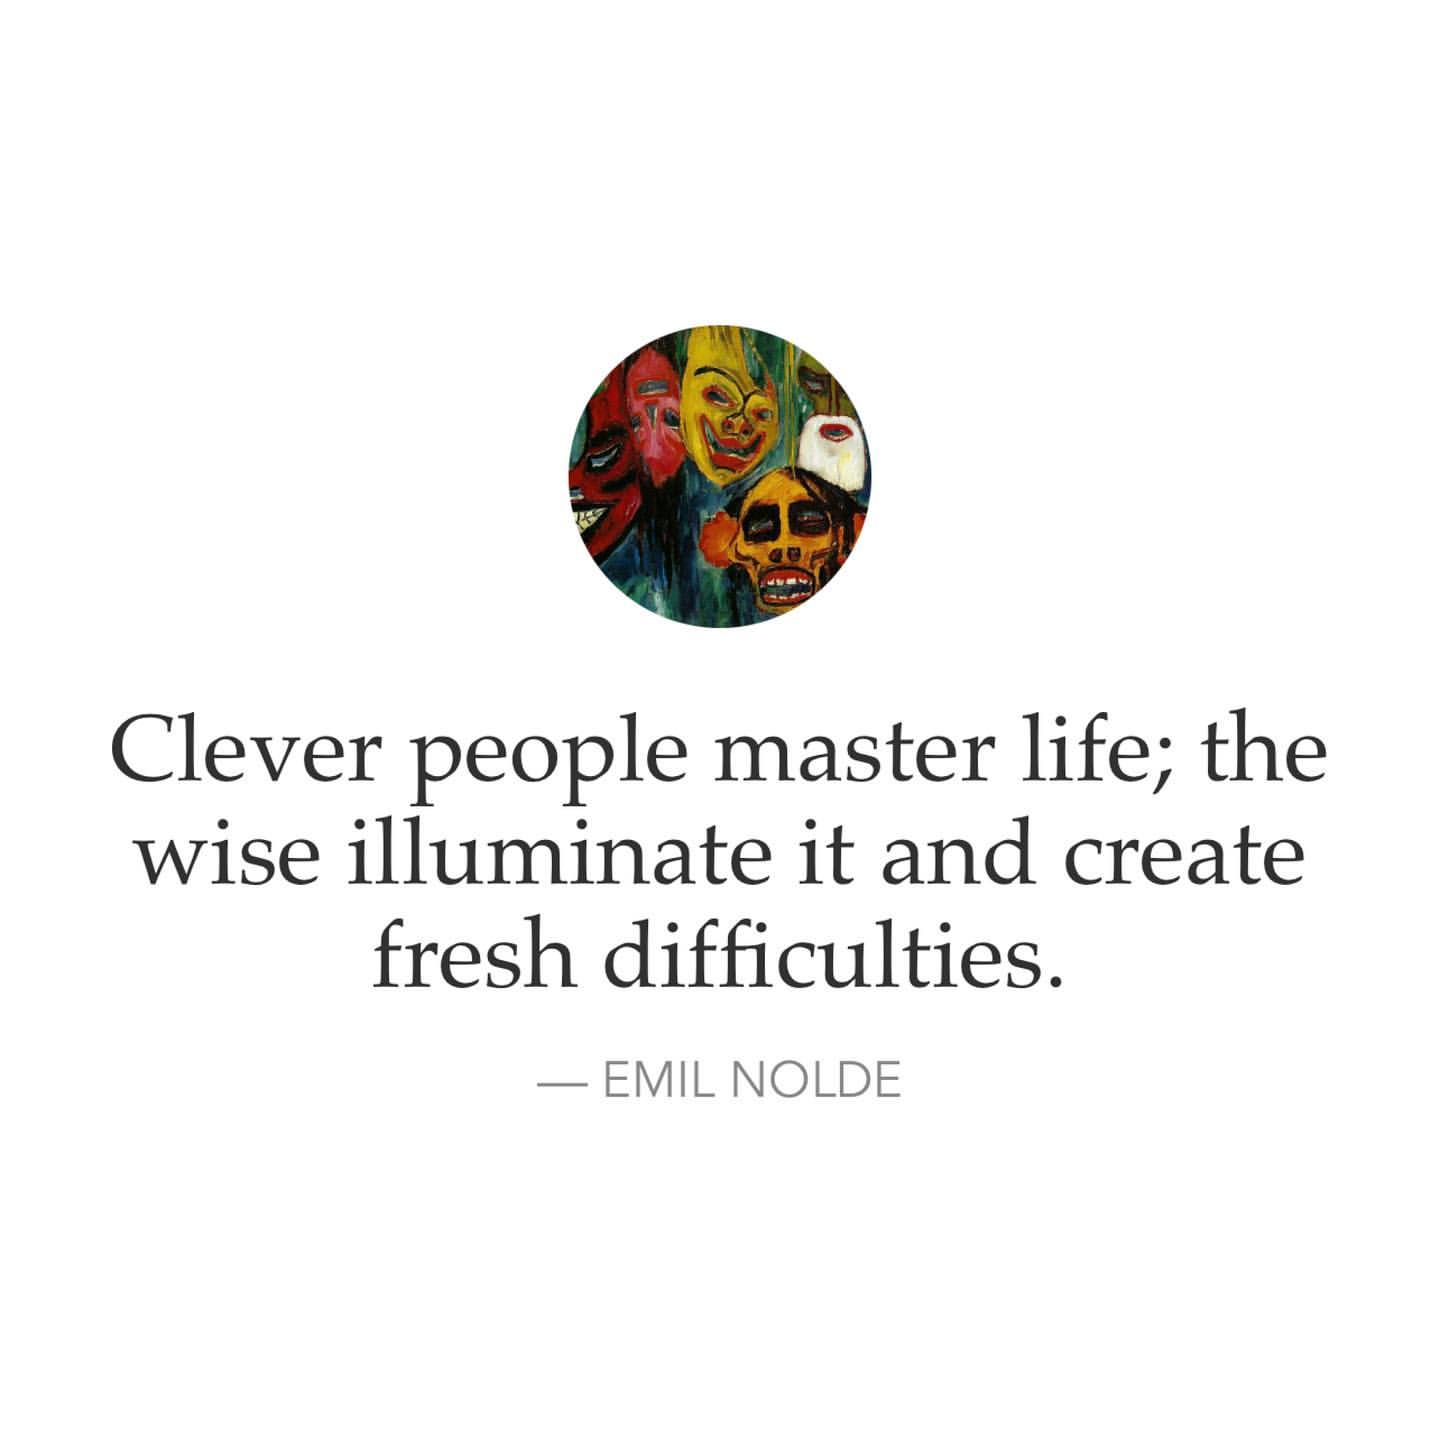 Clever people master life; the wise illuminate it and create fresh difficulties.